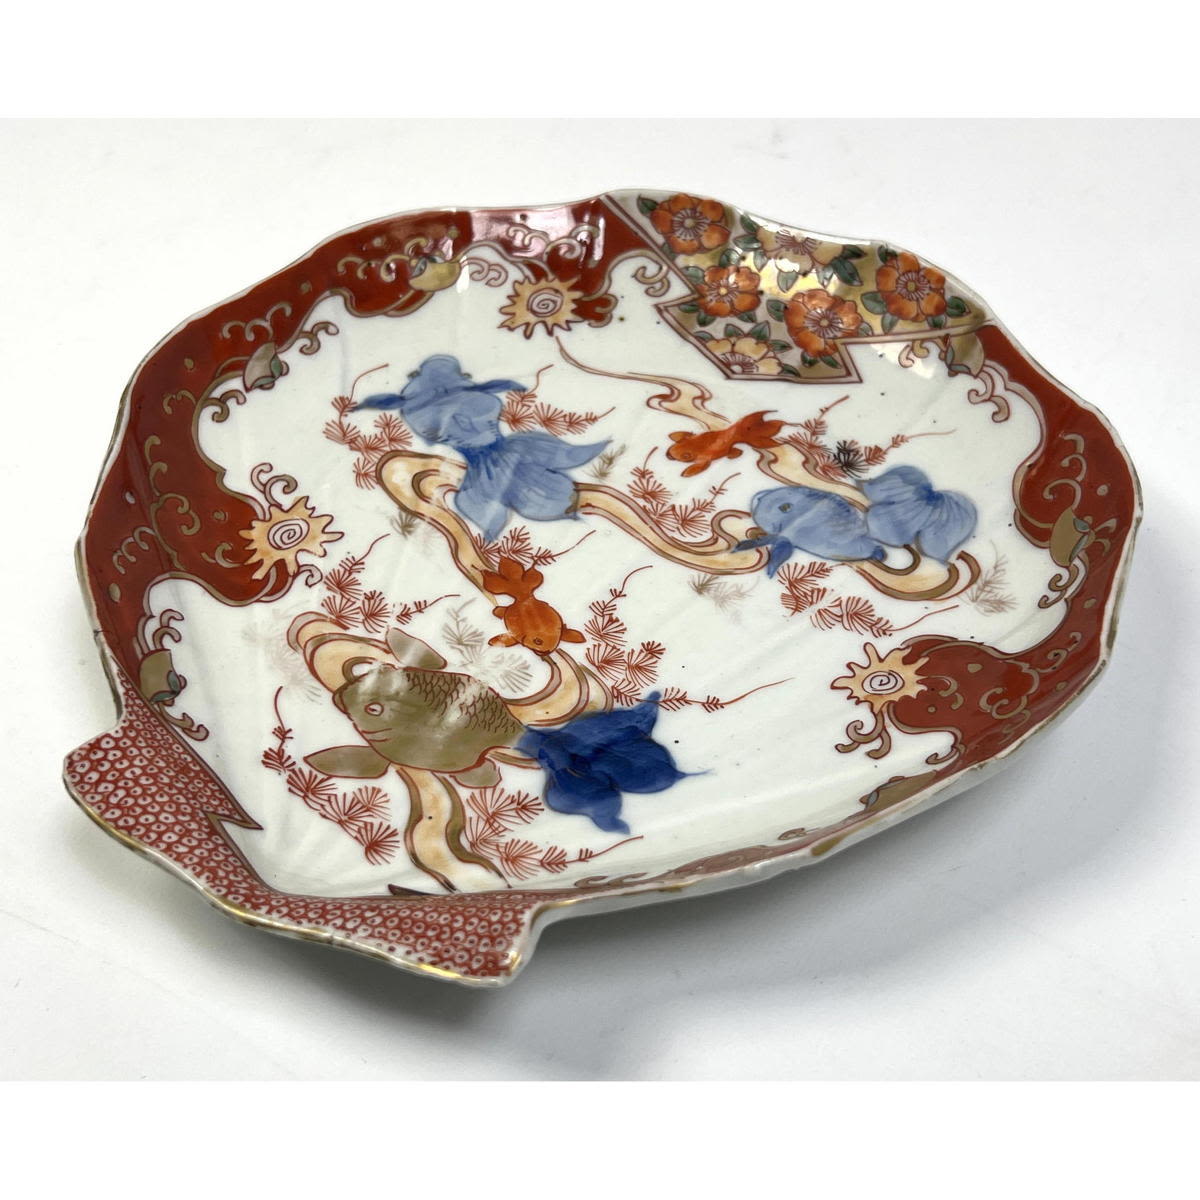 Paint Decorated Imari Shell Form 2a6271